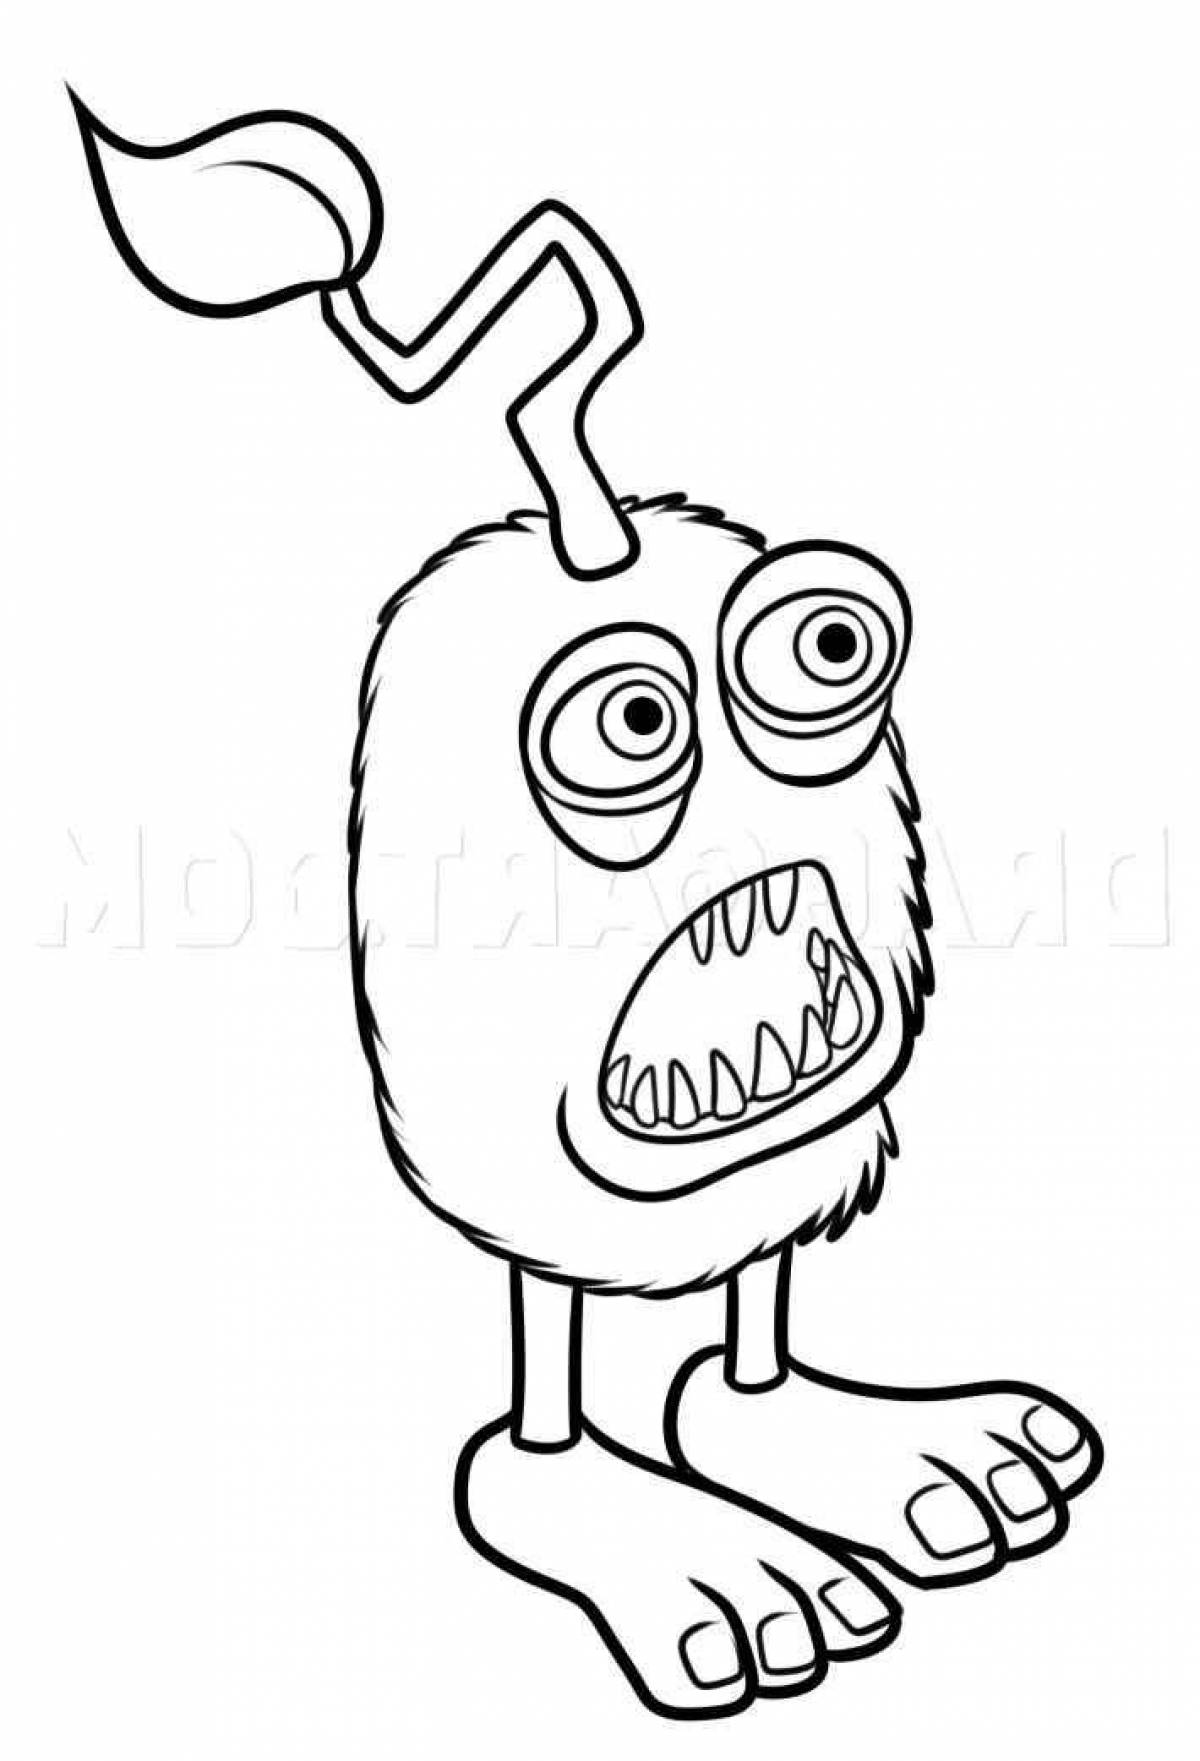 Sparkling May Singing Monster coloring page